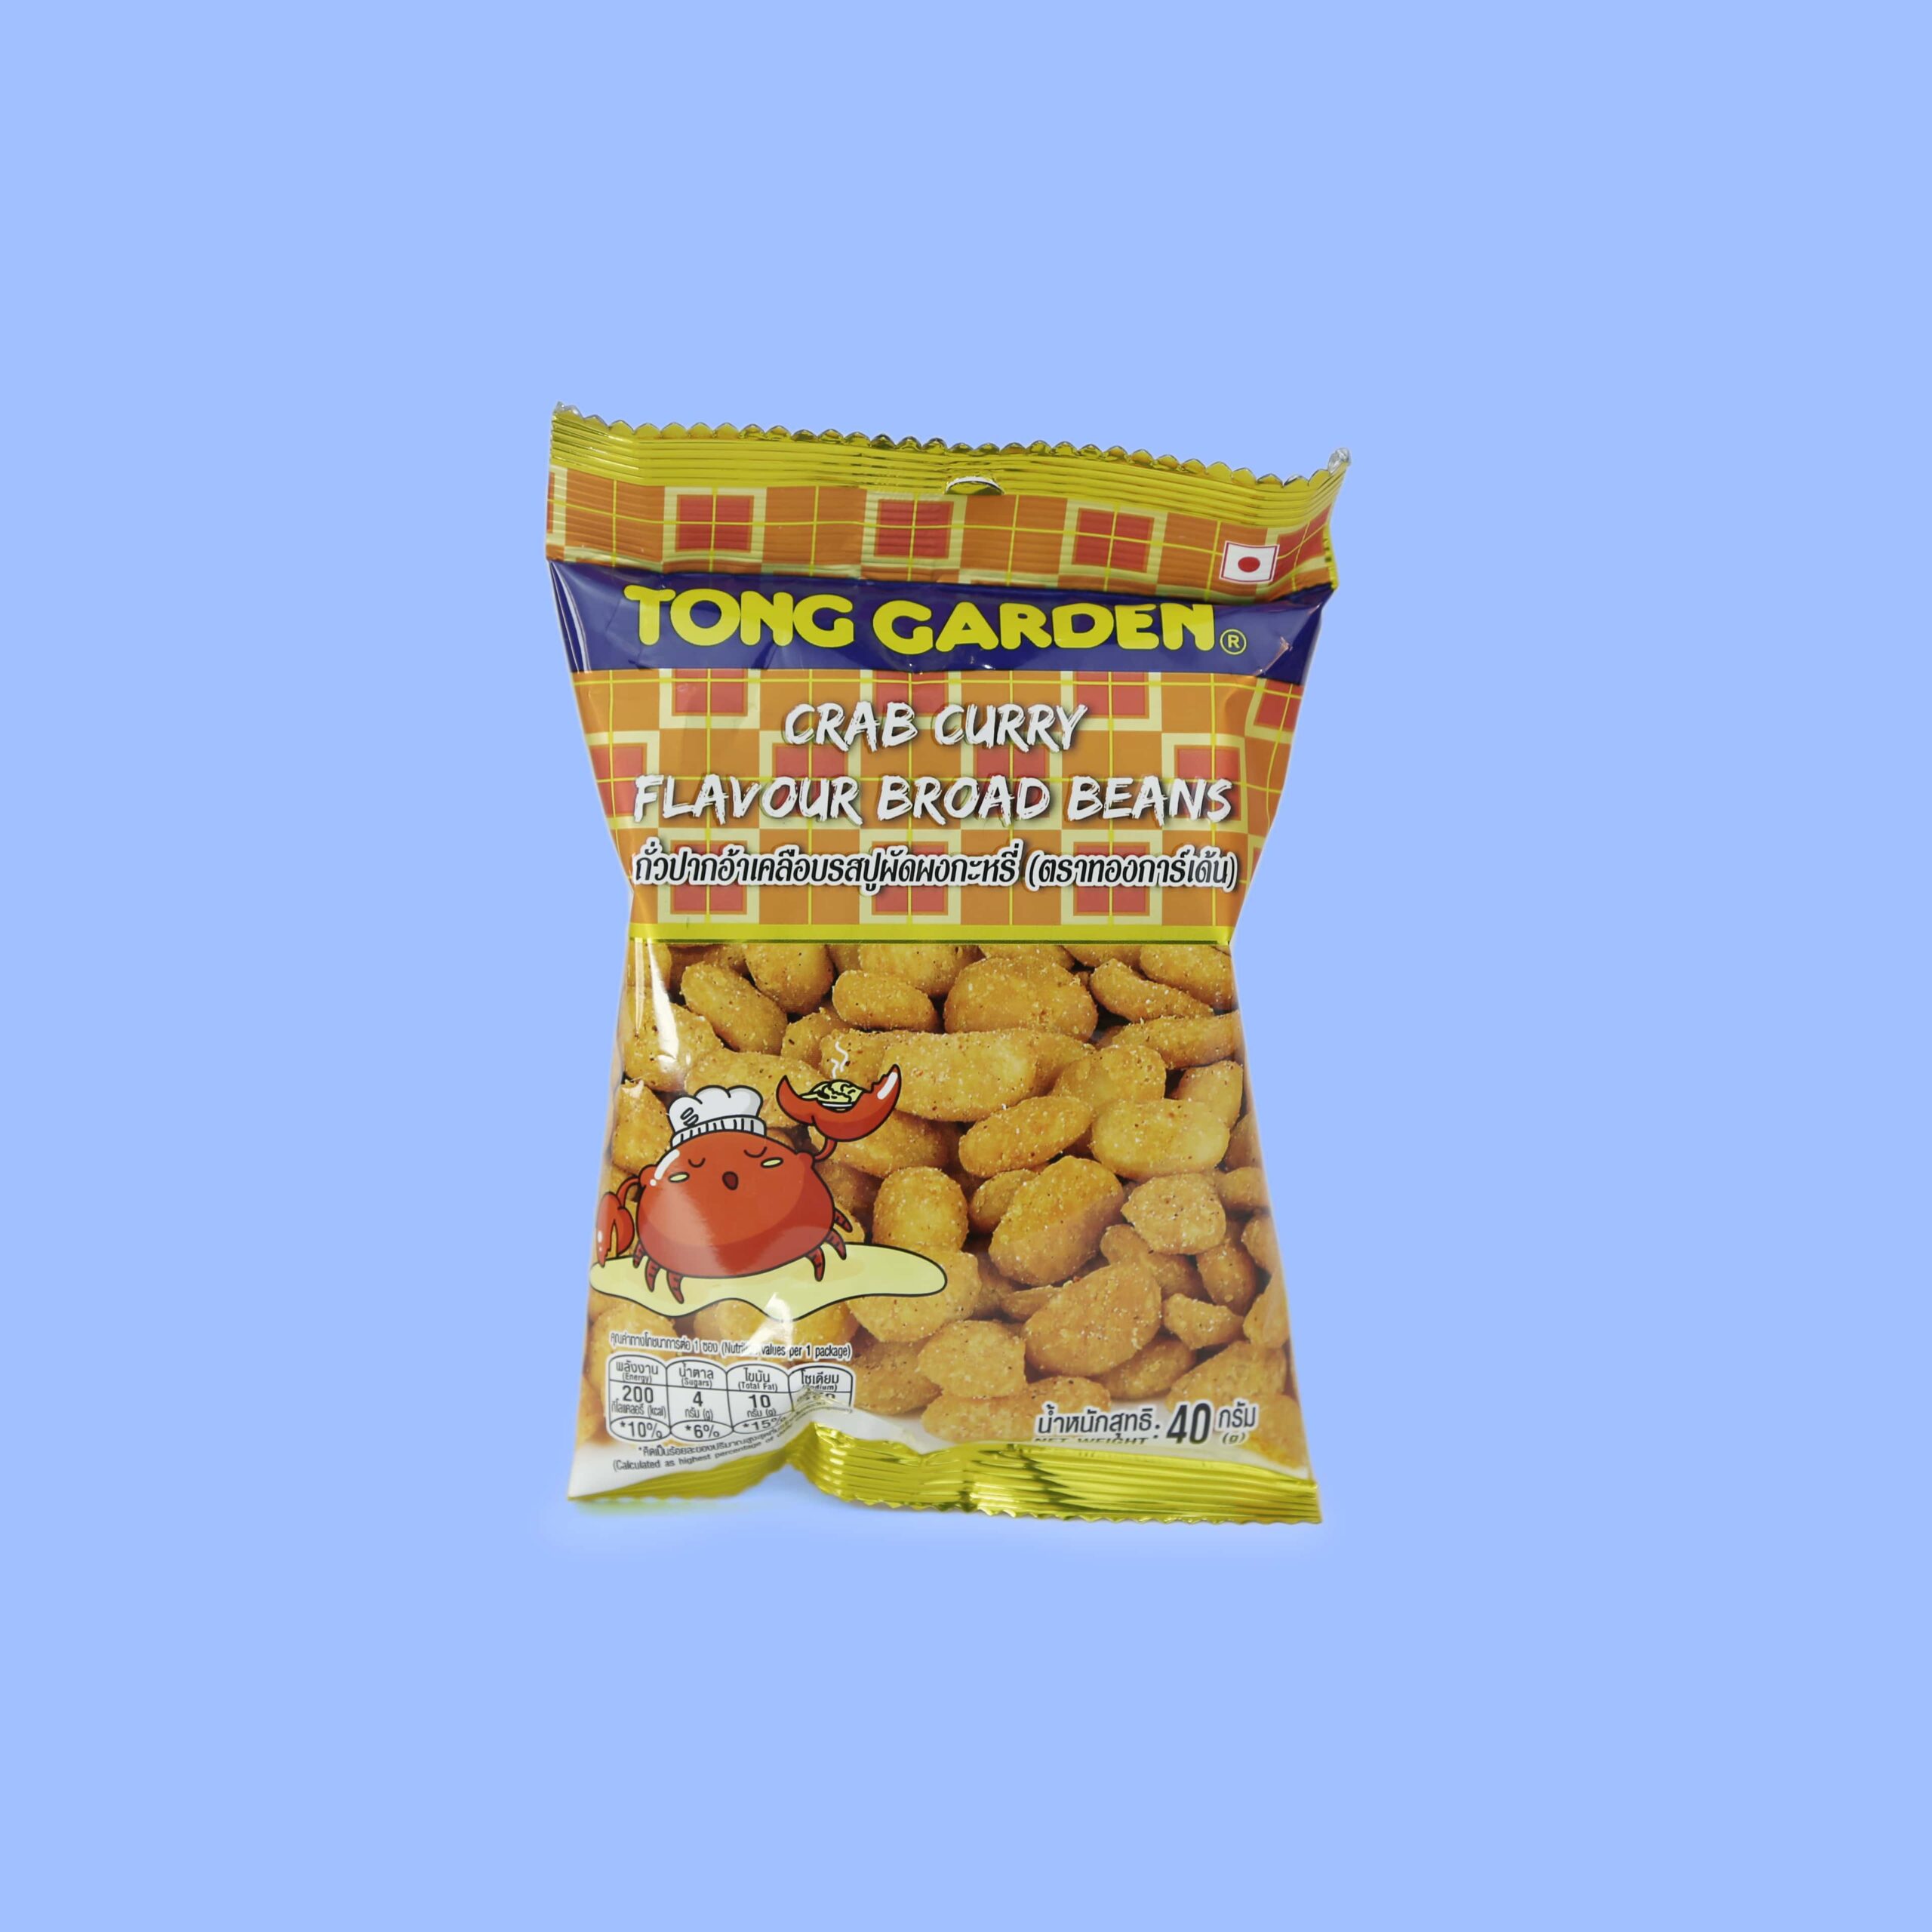 Tong Garden crab curry flavor broad beans sold in Thailand